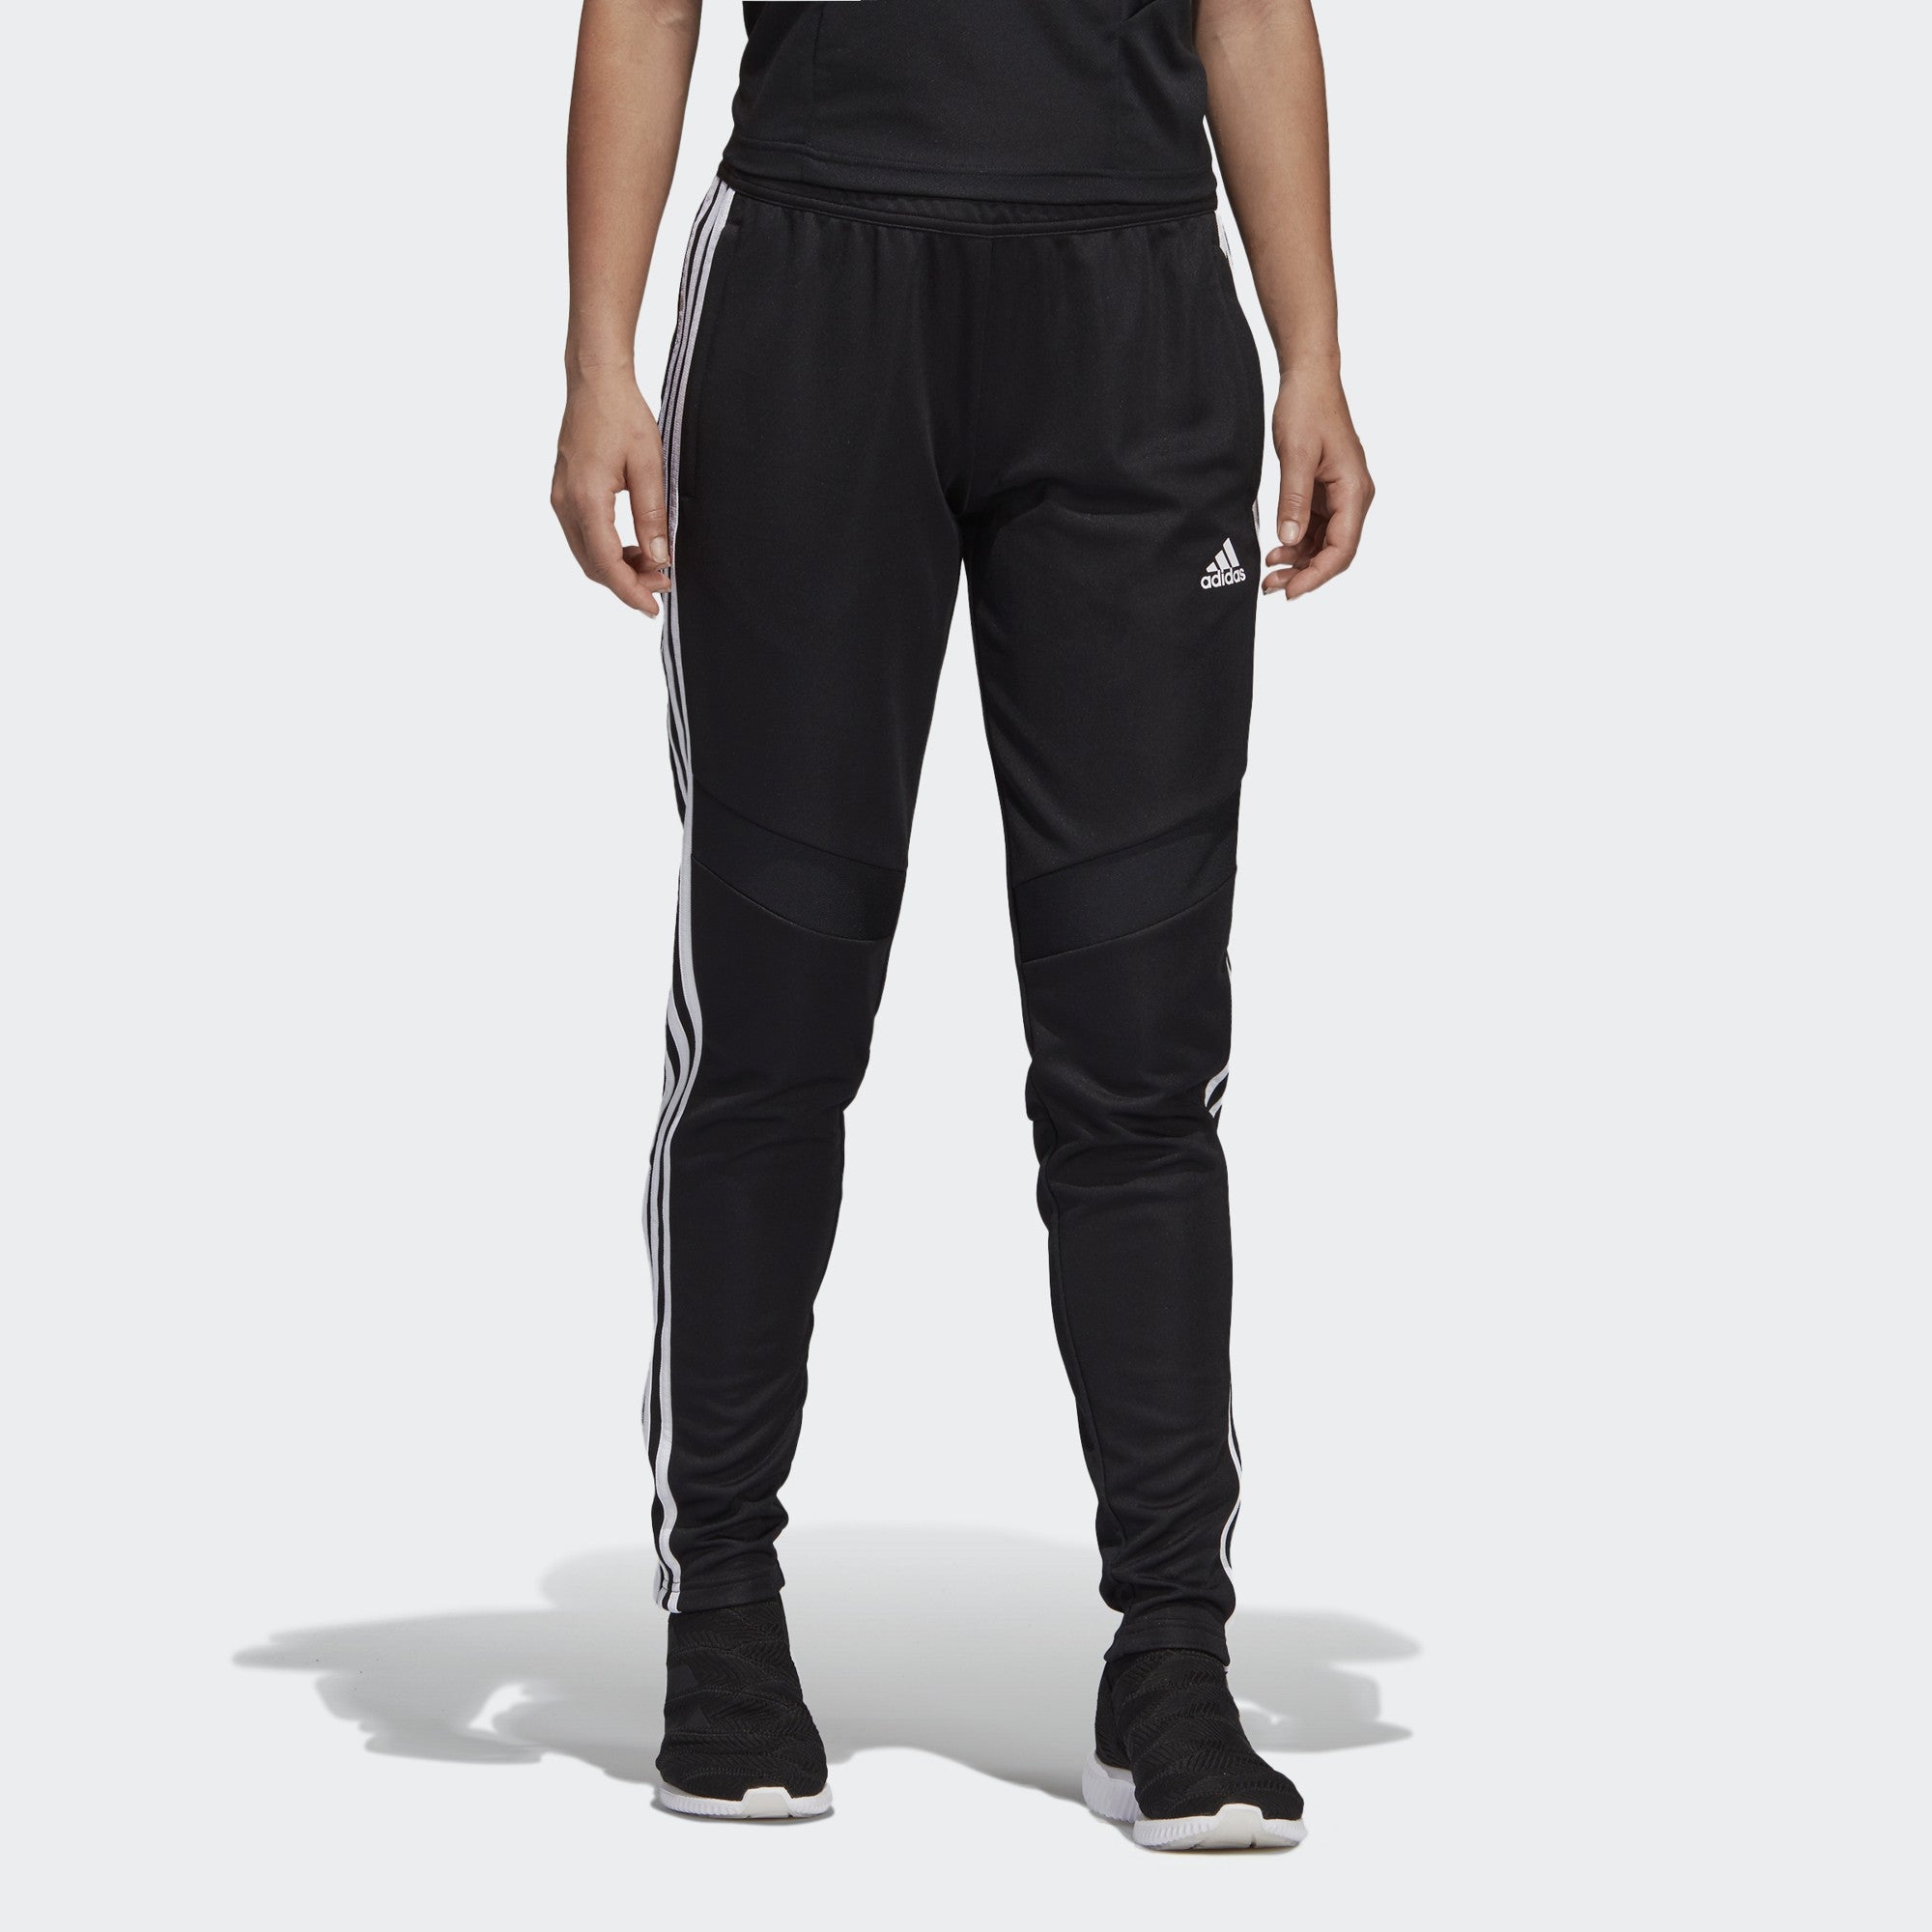 adidas climacool track pants | Pants for women, Adidas soccer pants, Track  pants